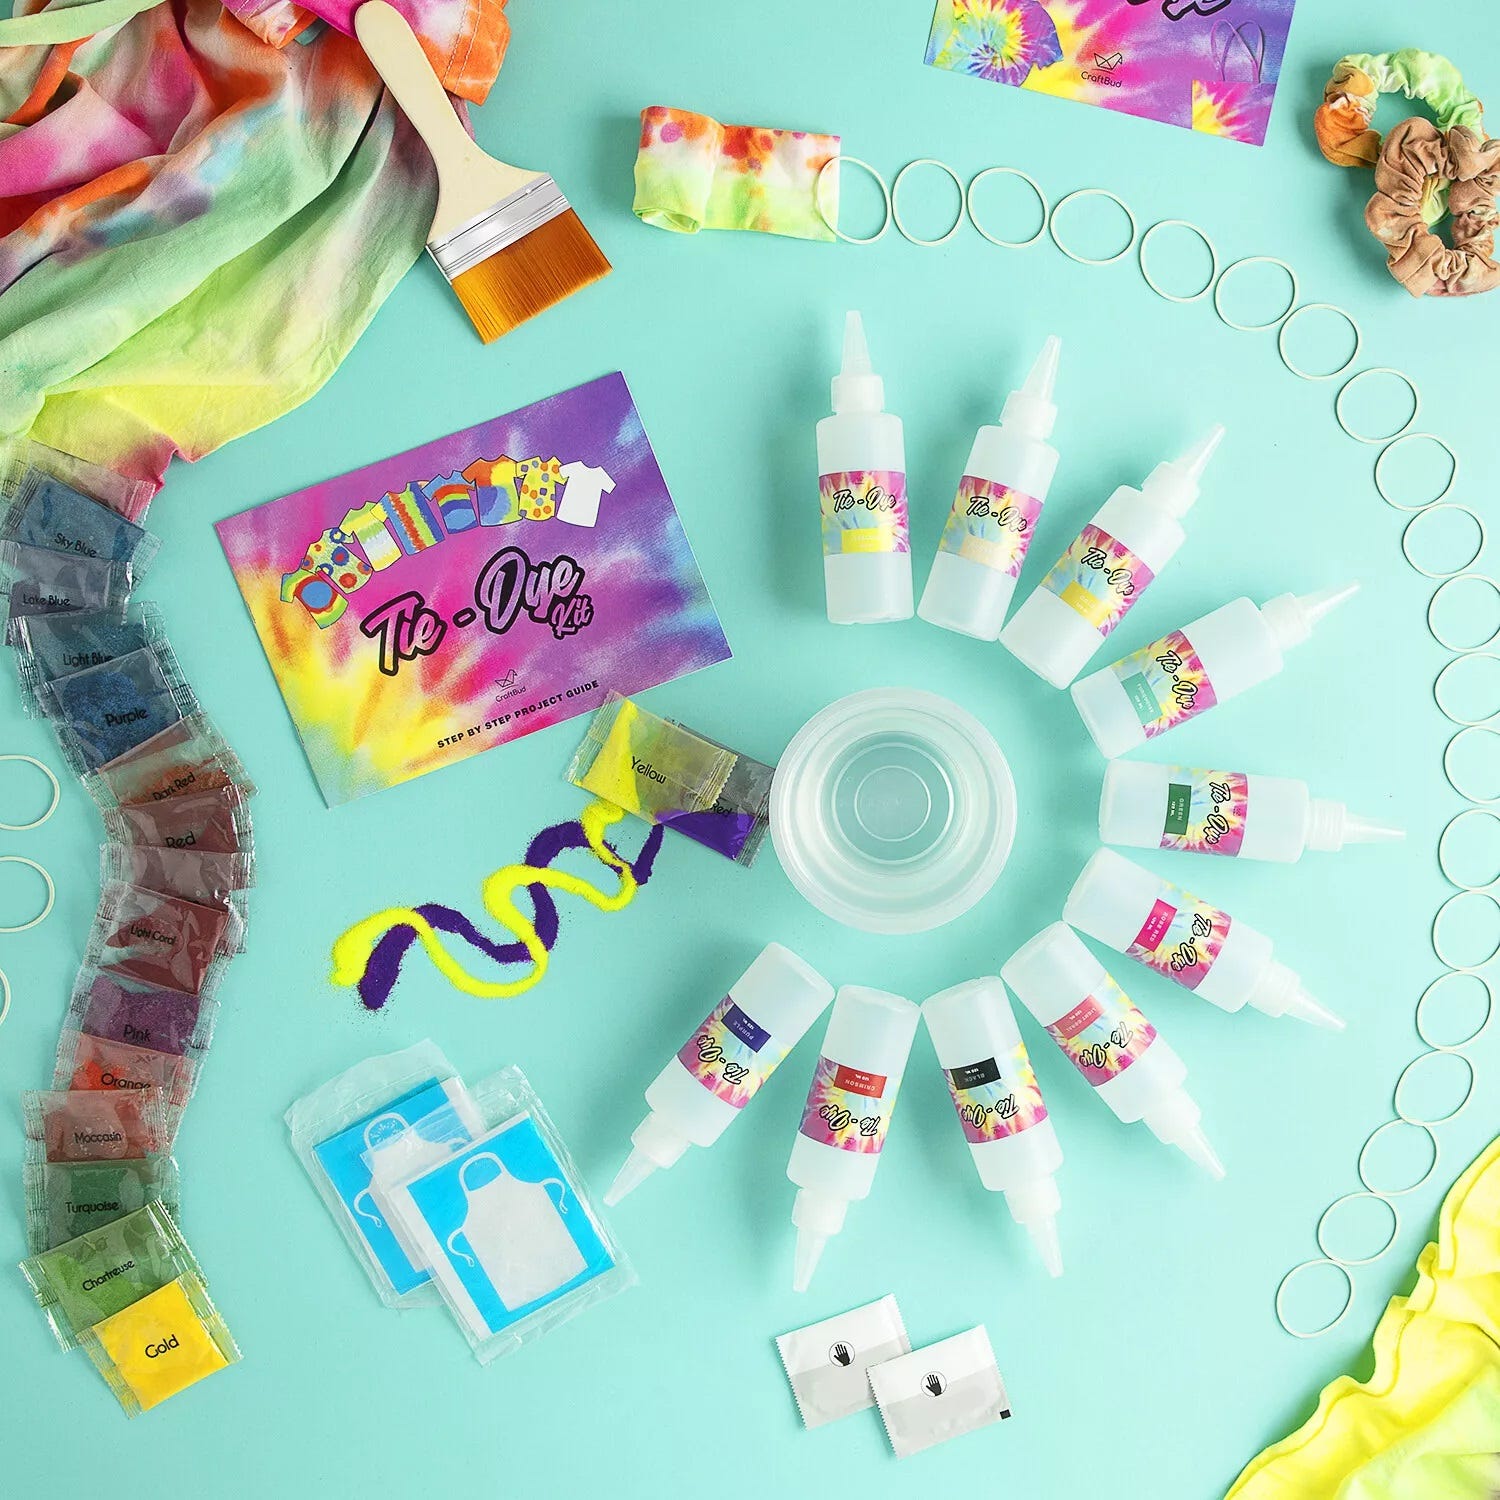 A tie-dye kit with various colored dyes in squeeze bottles, fabric items, rubber bands, and protective gloves on a teal background.